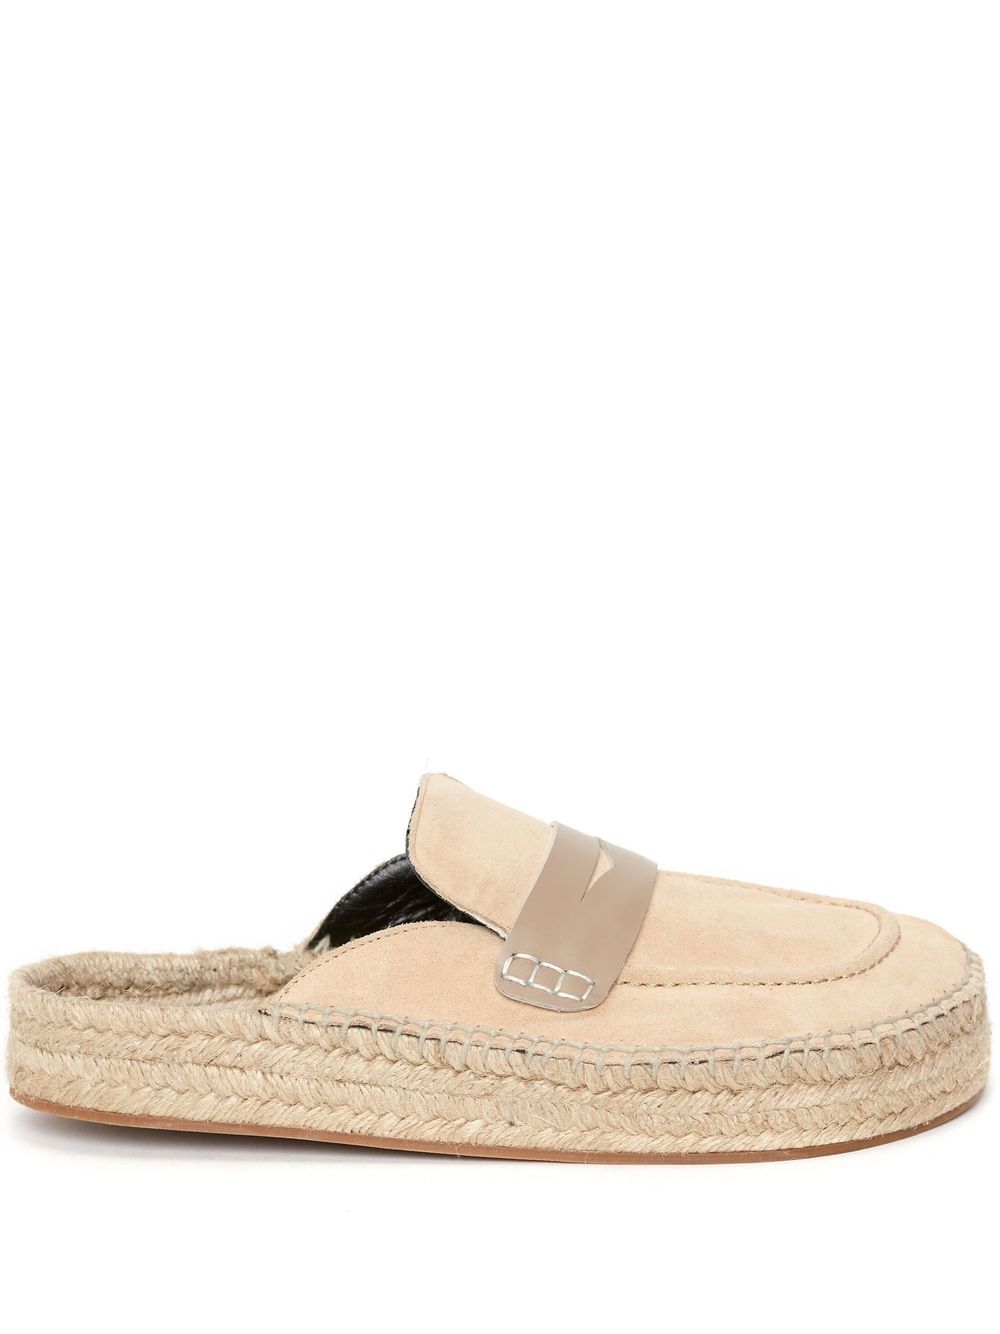 JW Anderson espadrille loafer mules - Neutrals